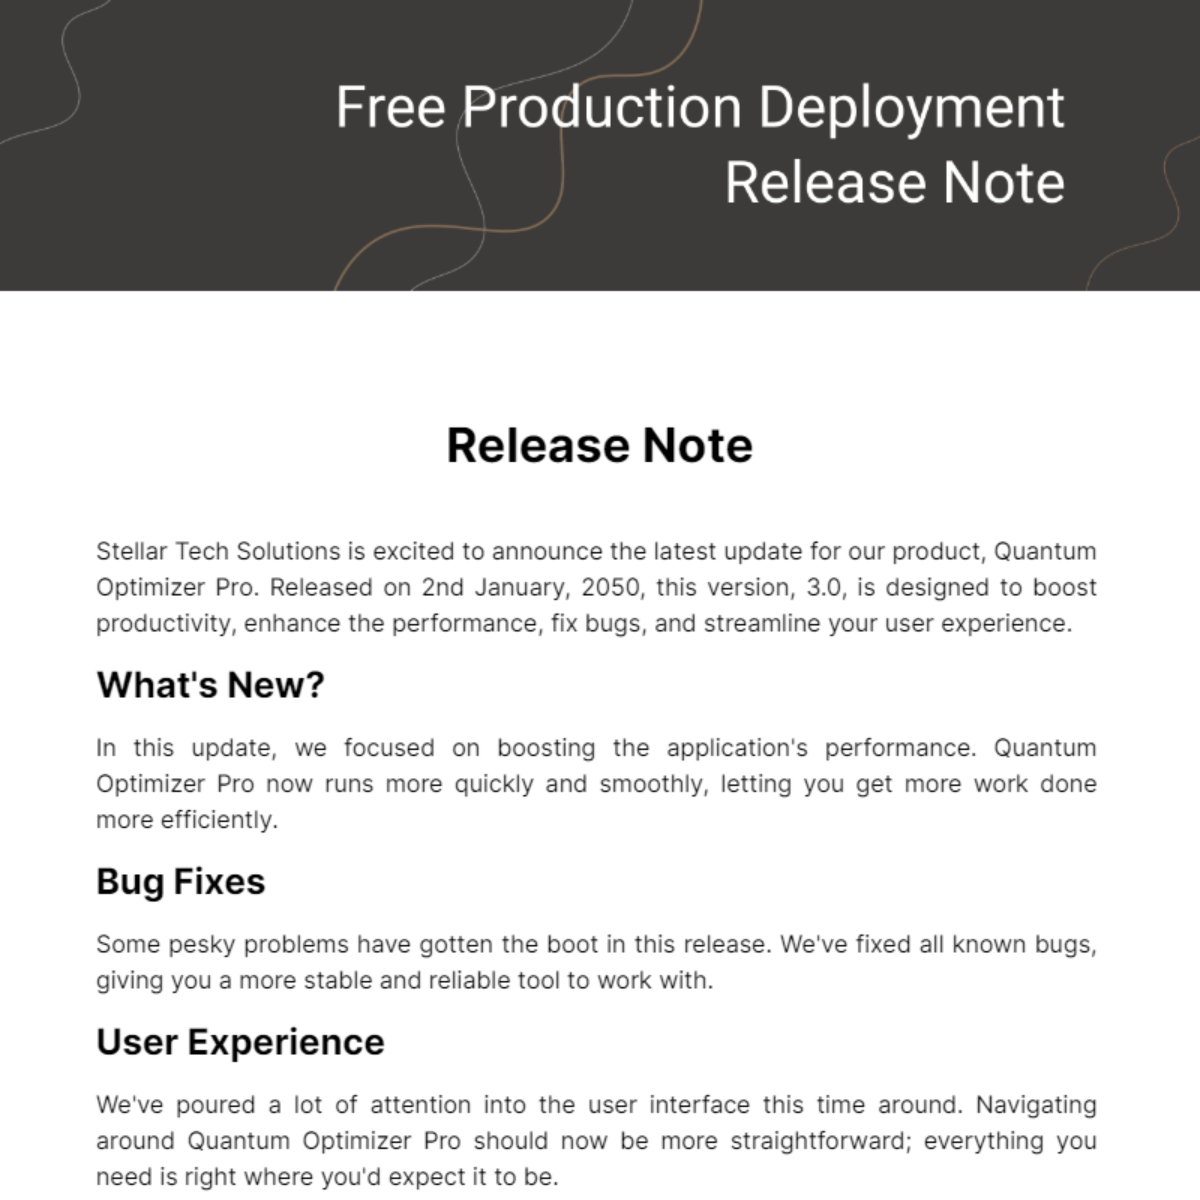 Free Production Deployment Release Note Template